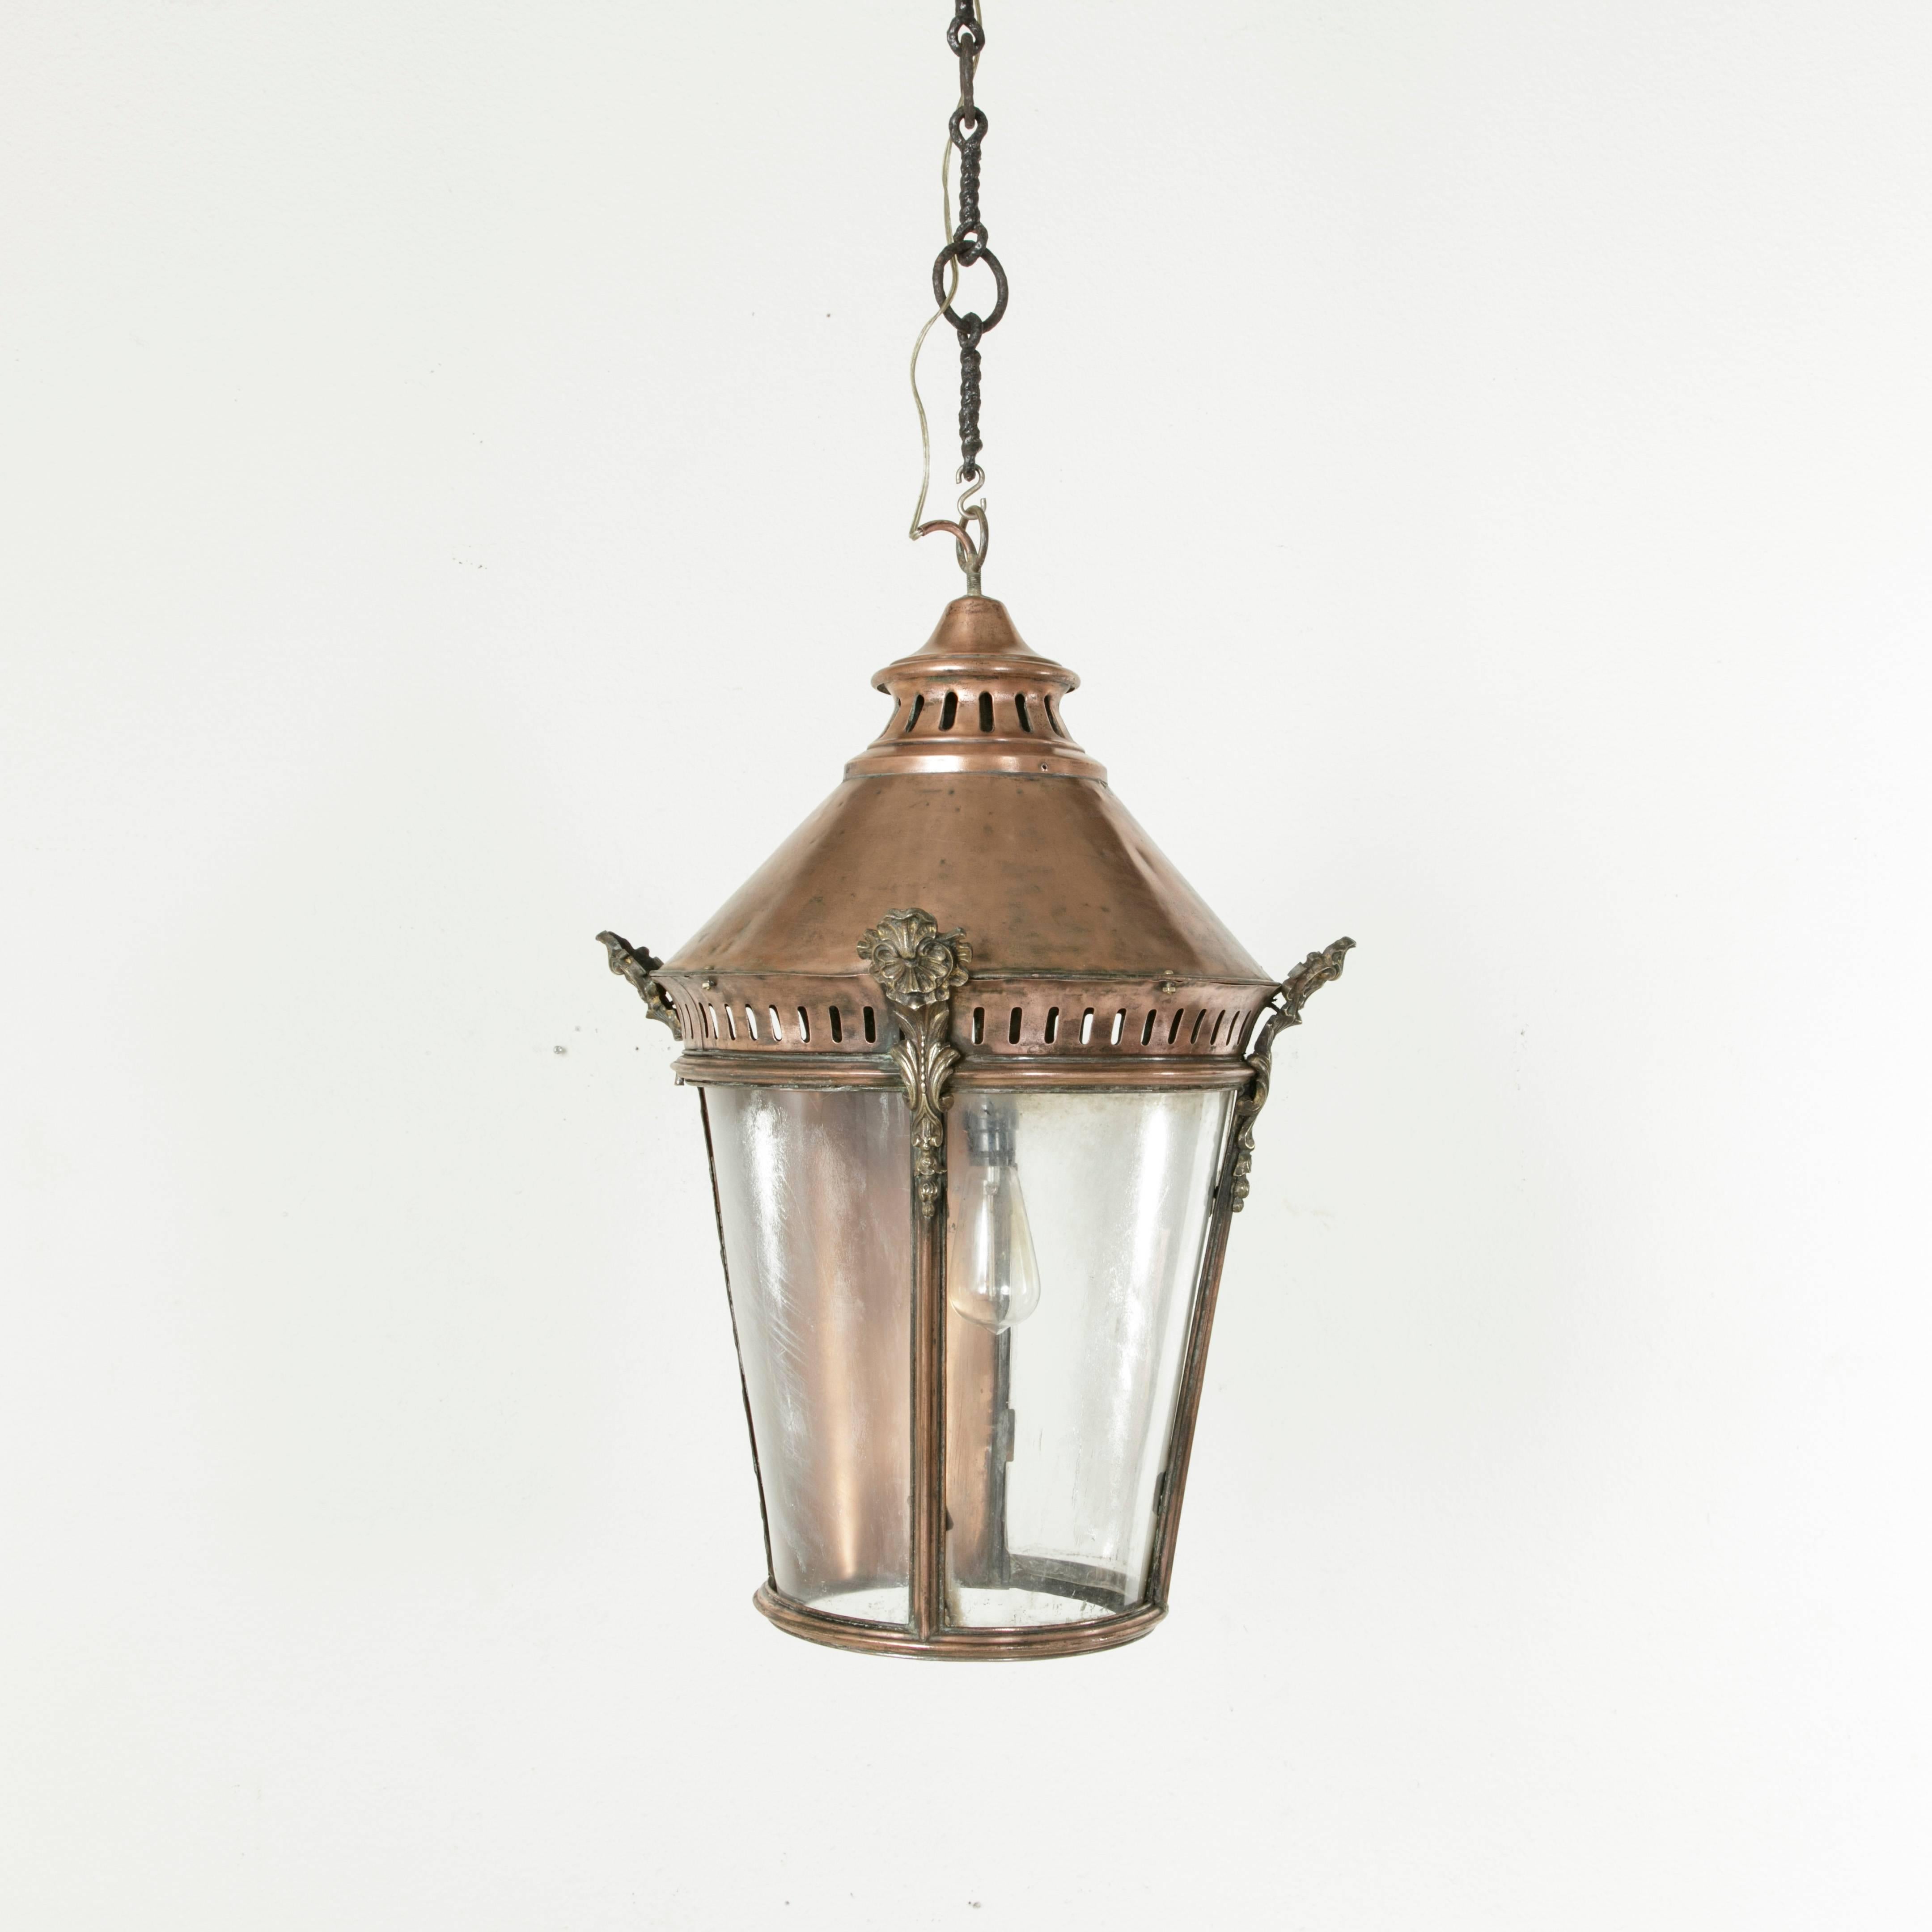 Early 20th Century Very Large French Copper and Brass Hanging Lantern with Iron Chain, circa 1900